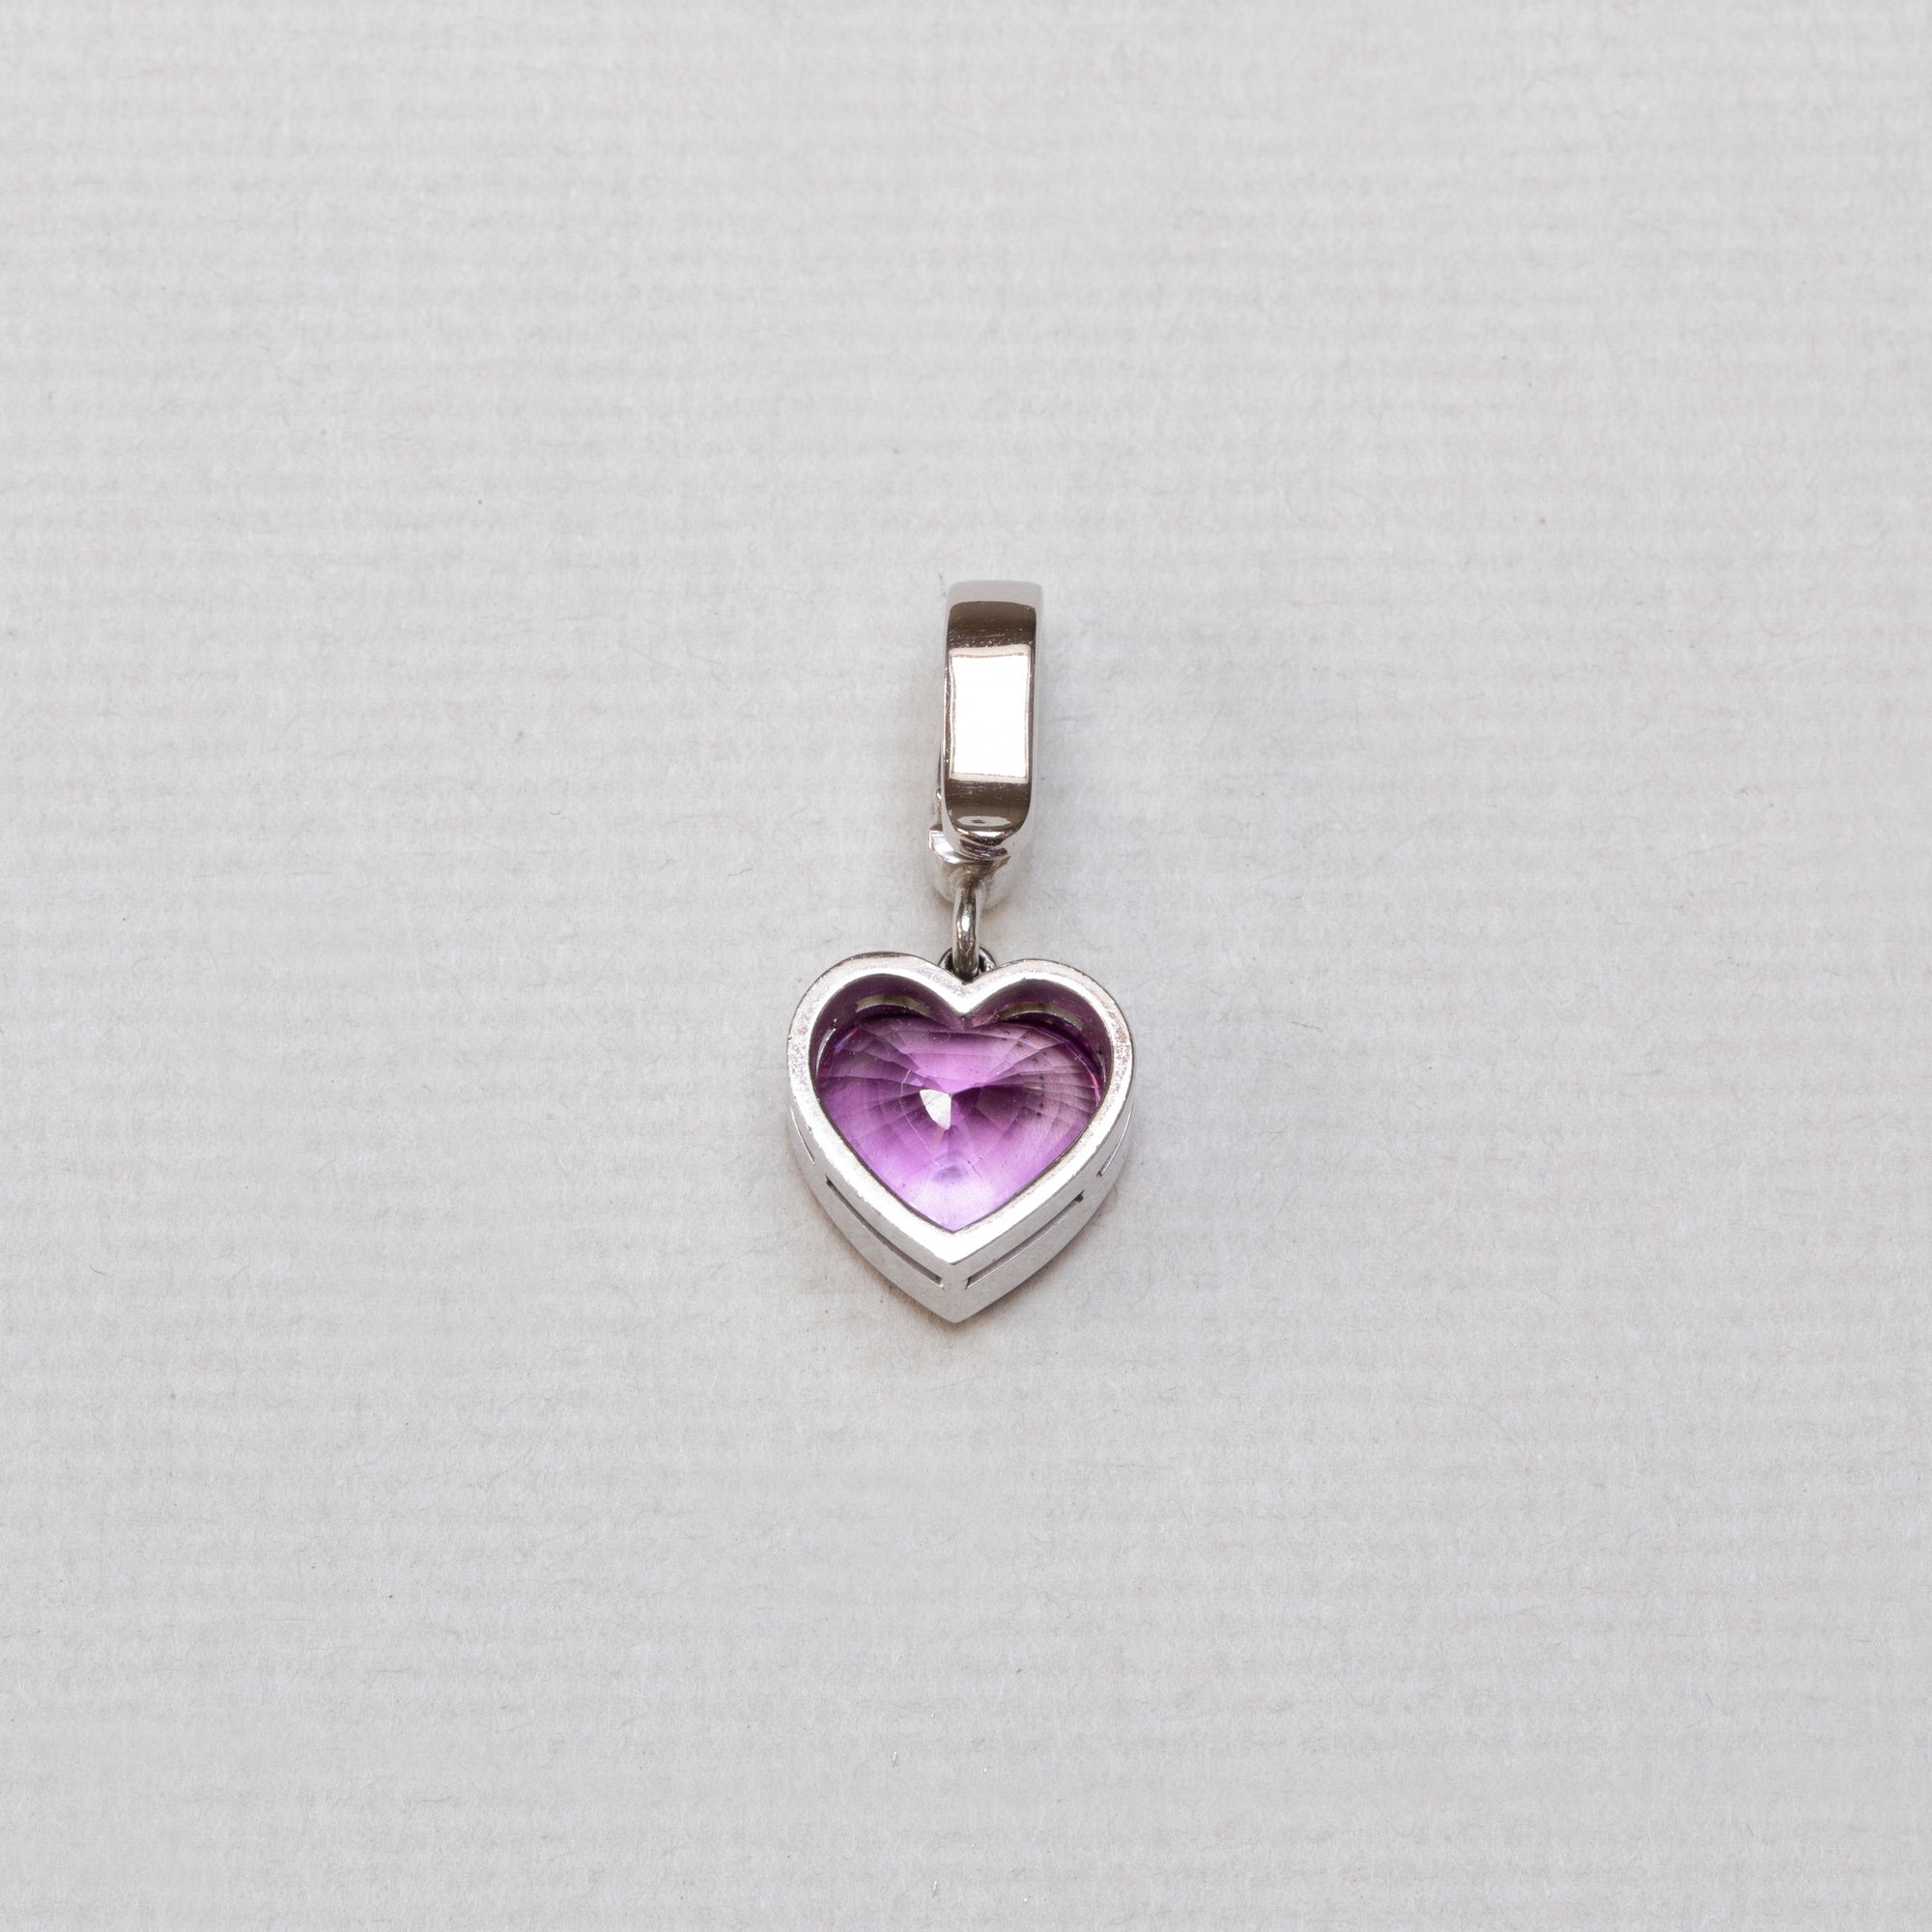 18ct White Gold Heart Charm with Diamonds and Pink Tourmaline